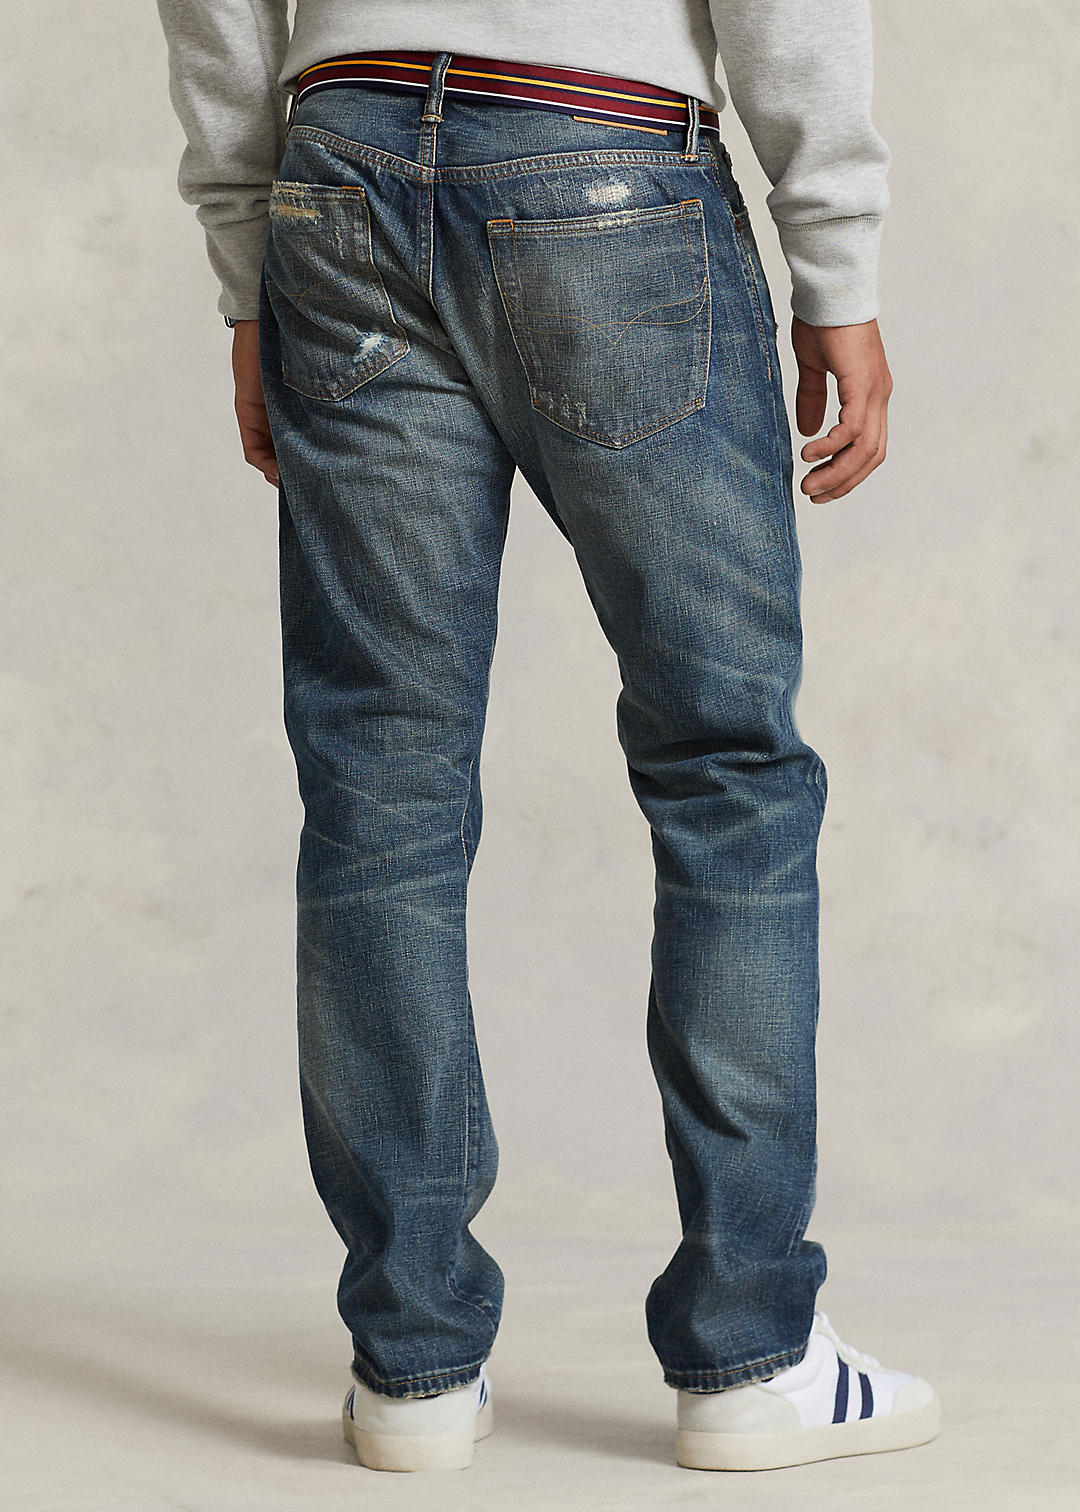 Polo Ralph Lauren Classic Fit Distressed Selvedge Jean 5